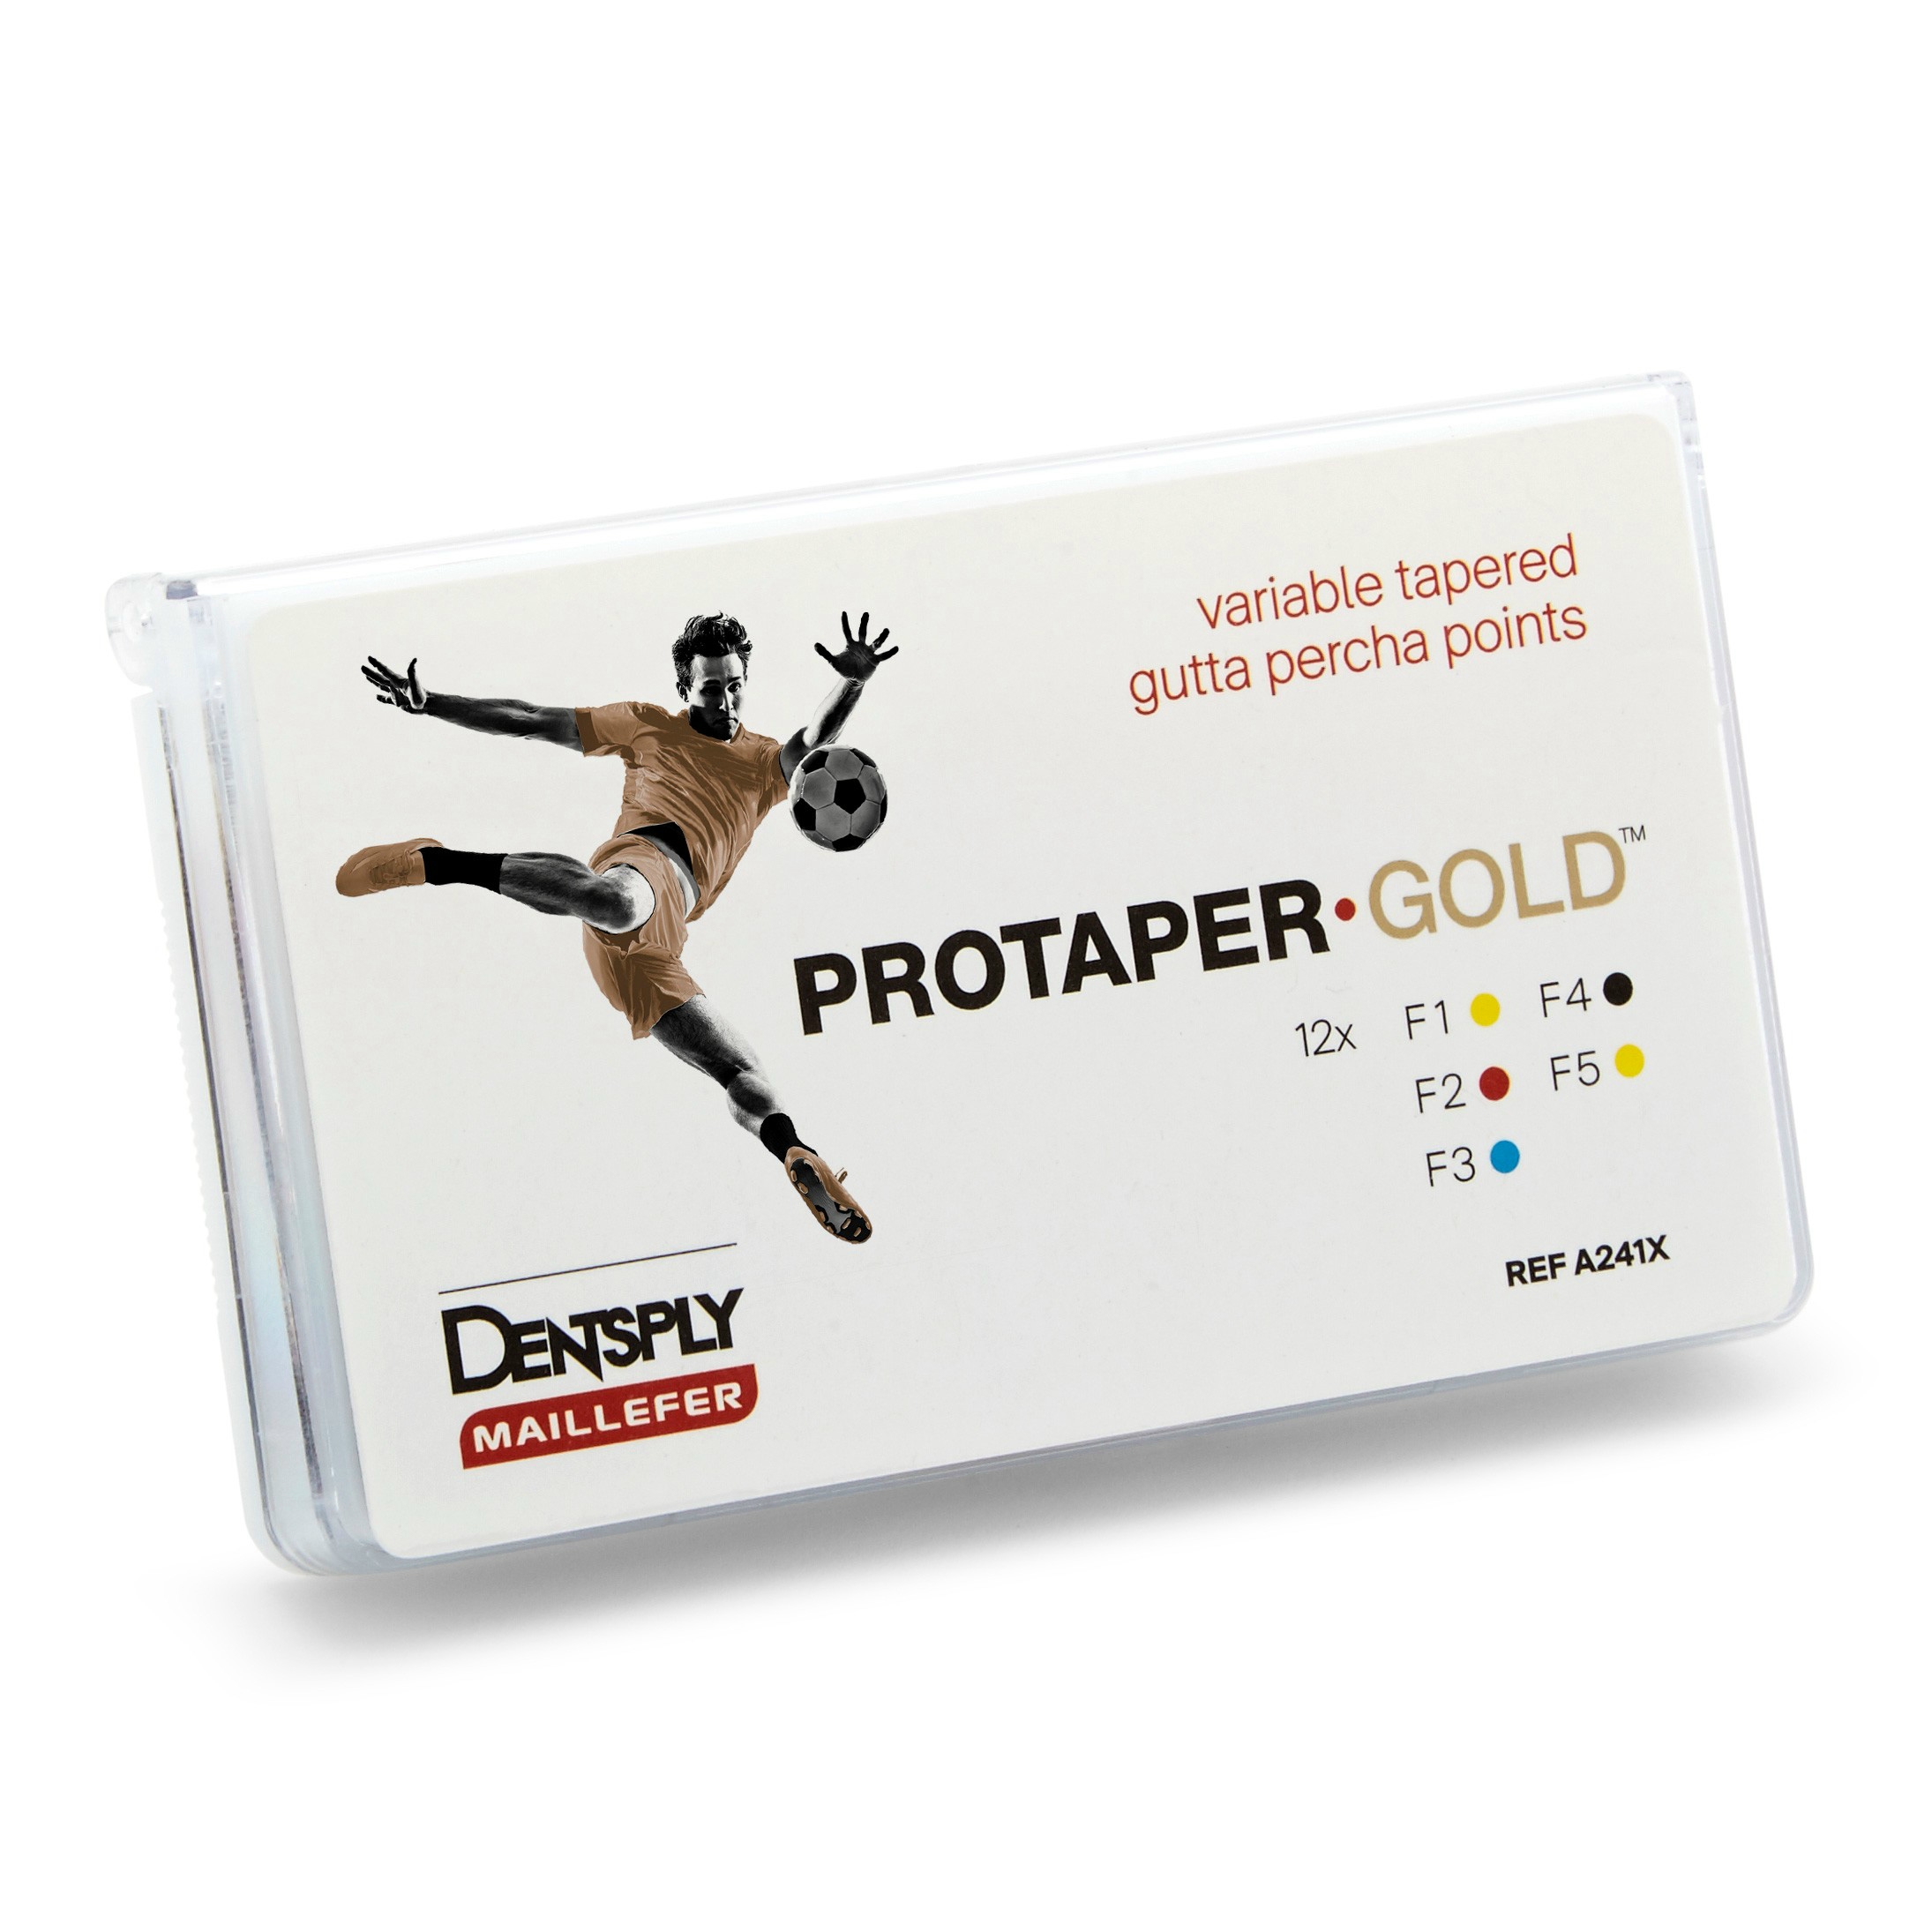 Protaper gold paper point F1